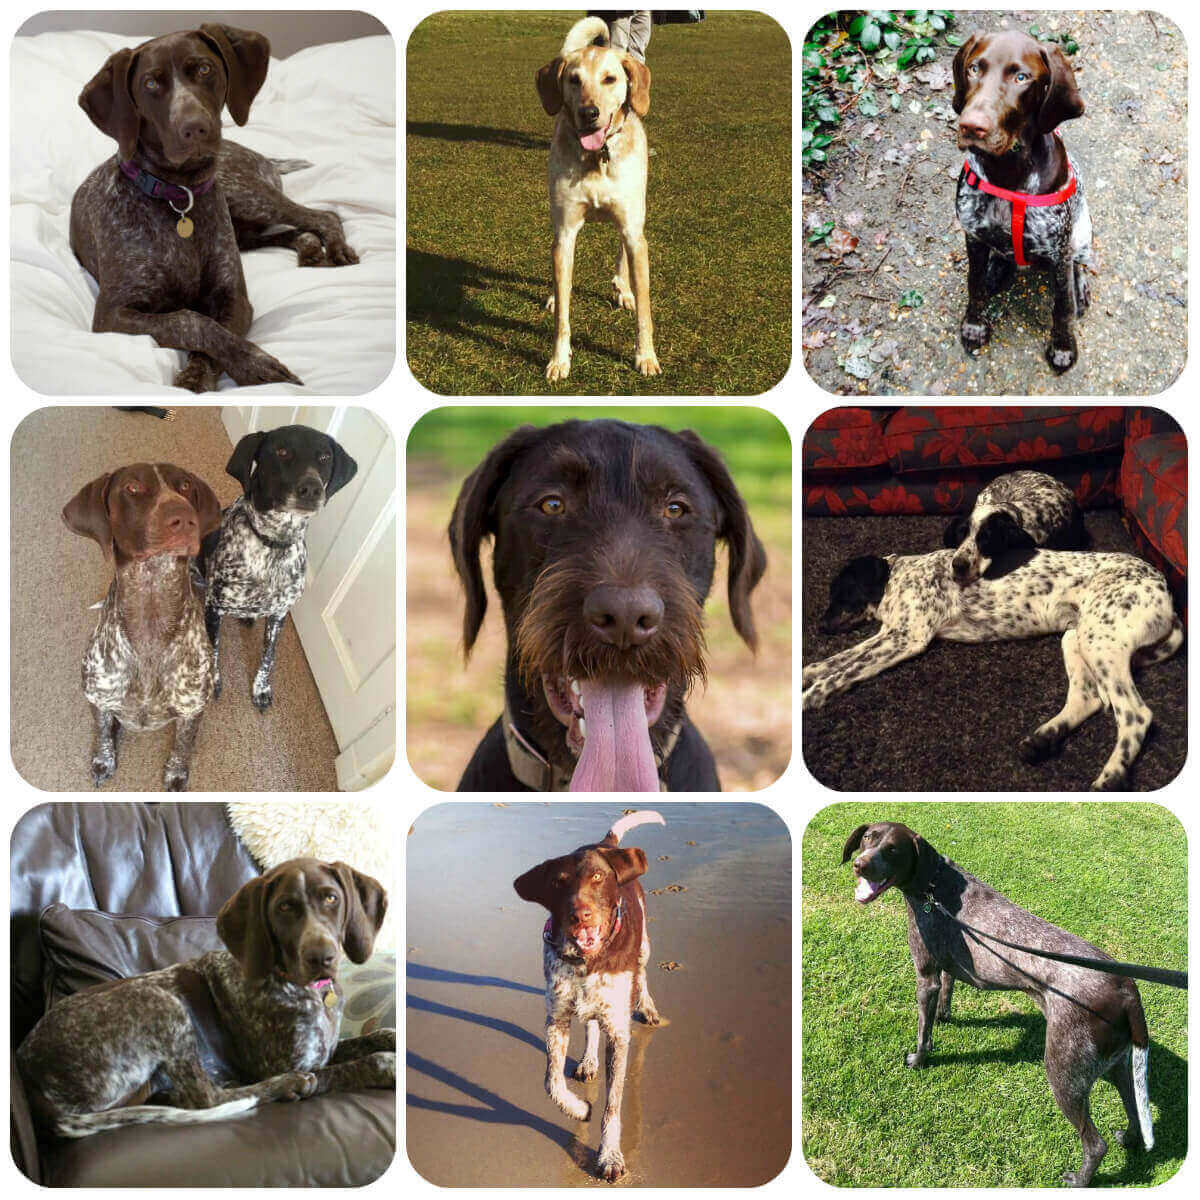 A collage of photos of Pointers. They are all large, slim dogs. Many of them have spotty coats on their bodies but solid coloured heads.